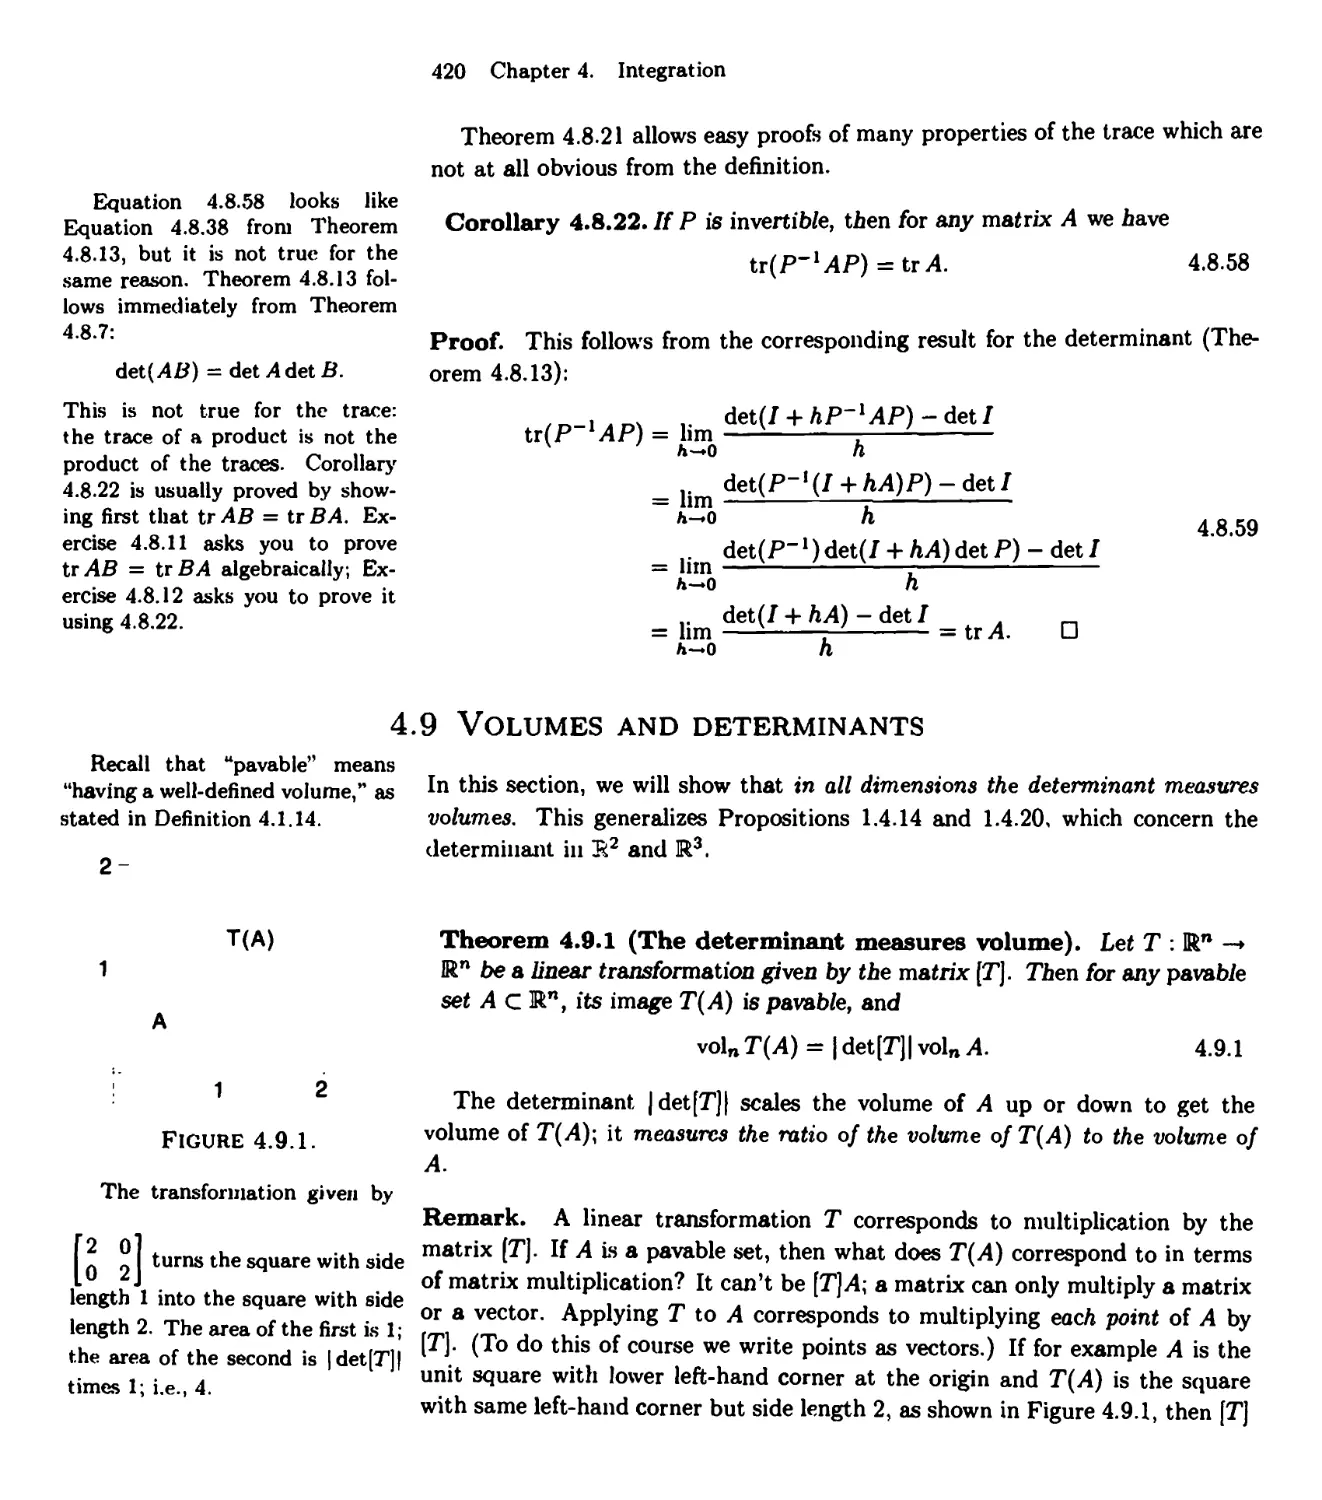 4.9 Volumes and Determinants